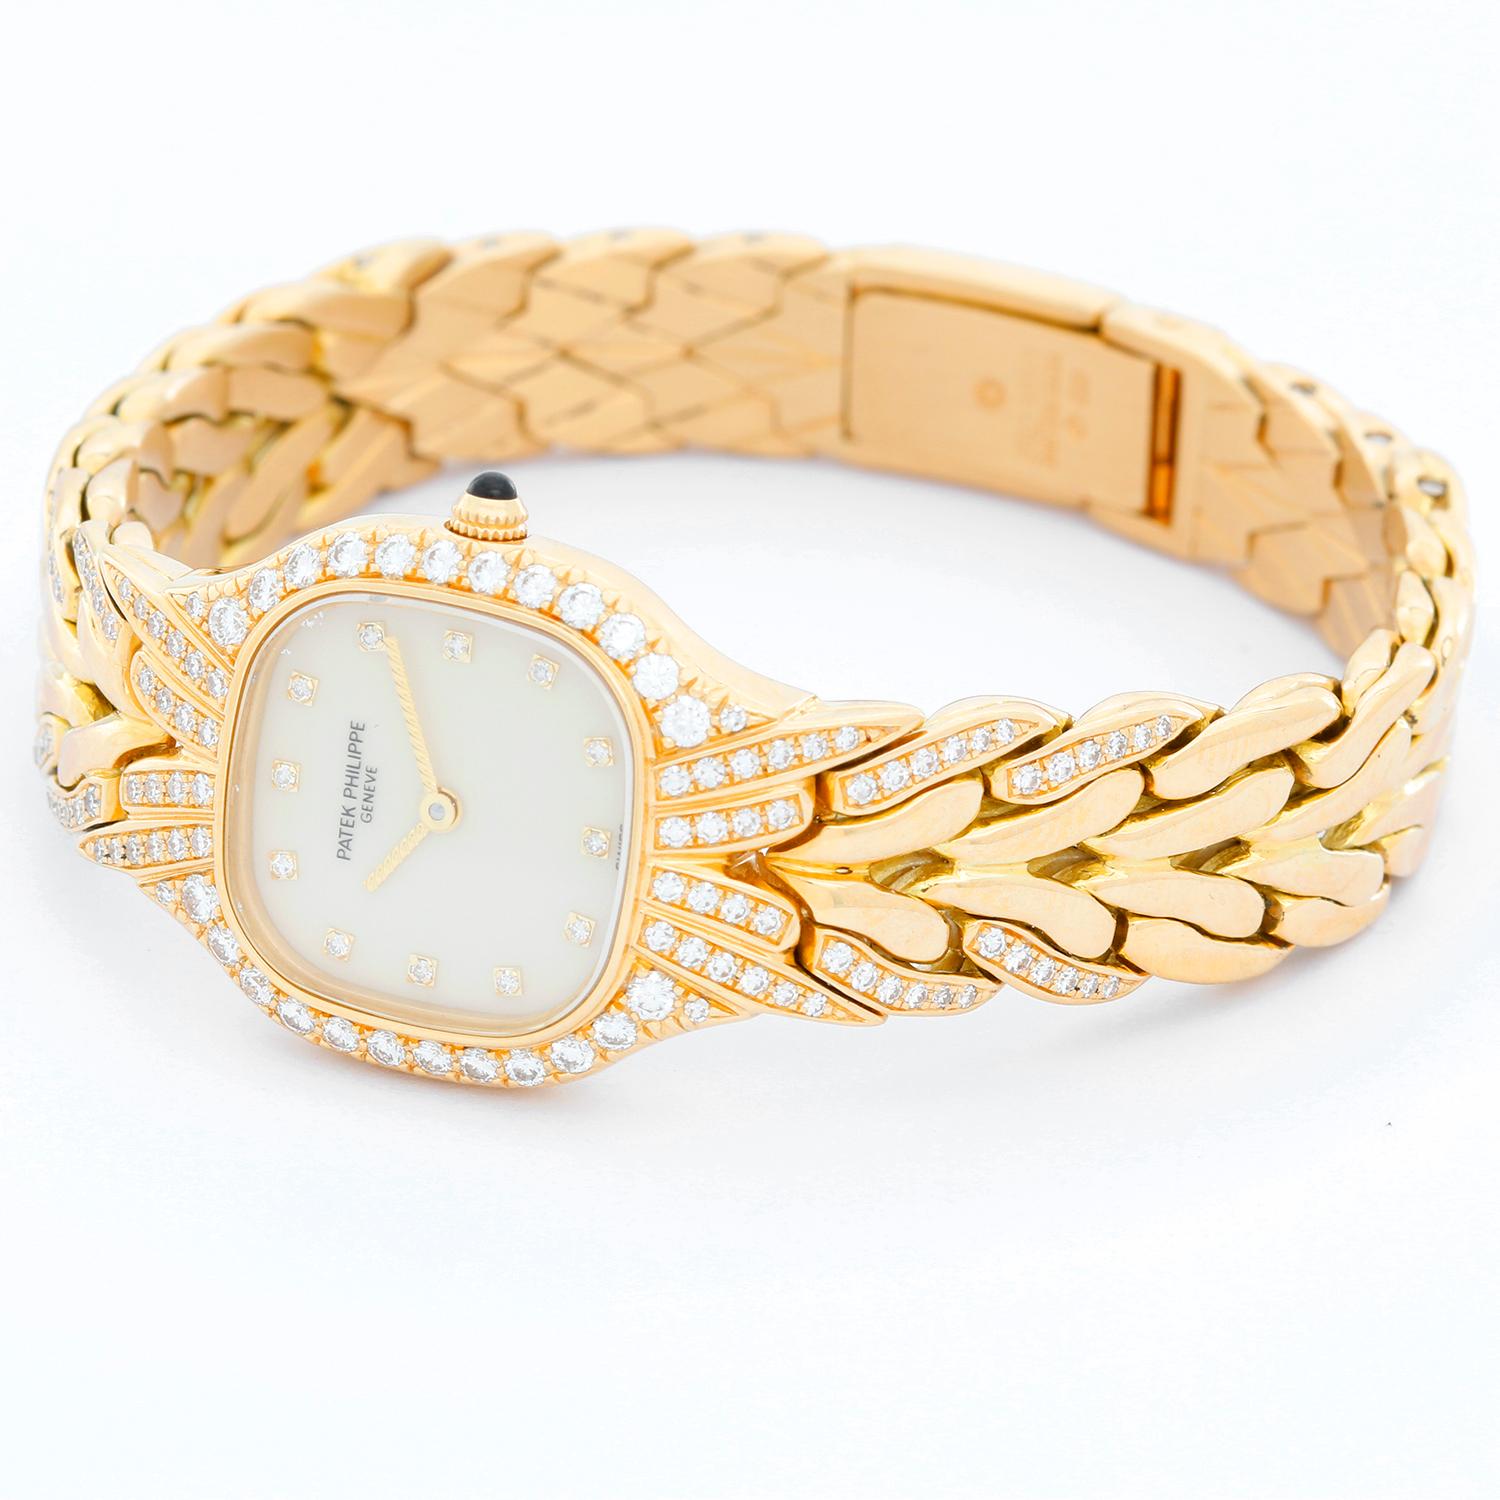 Patek Philippe & Co. La Flamme 18K Yellow Gold Watch Ref 4815 - Quartz. 18K Yellow Gold  with diamond bezel ( 22 x 27 mm ). Ivory dial with diamond hour markers. 18K Yellow Gold bracelet with partial diamond bracelet. Will fit approx 6 1/2 inch